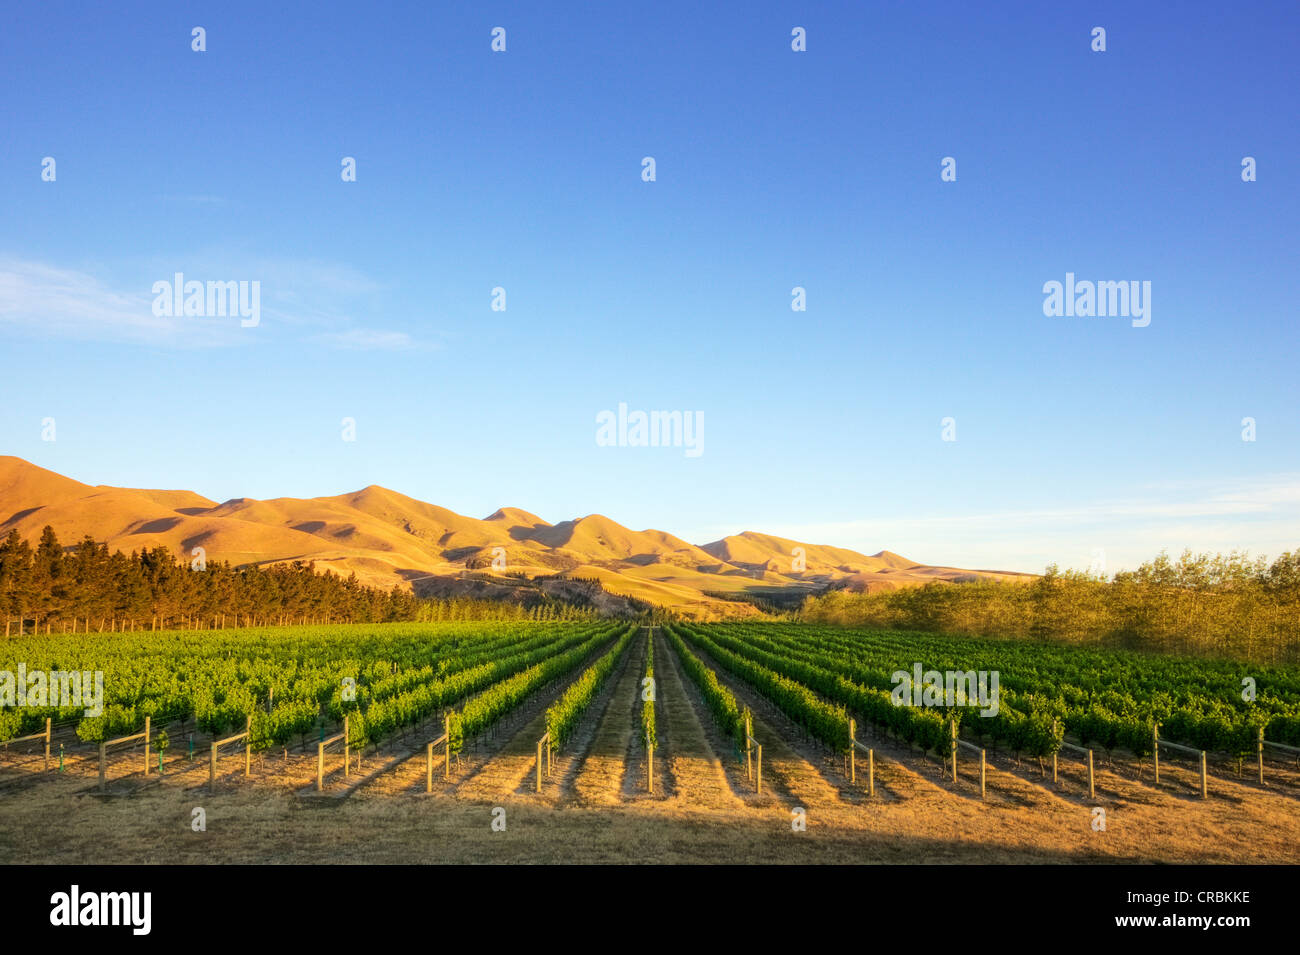 A vineyard near Waipara, in North Canterbury, New Zealand, in early morning sunlight. Tonemapped HDR image. Stock Photo